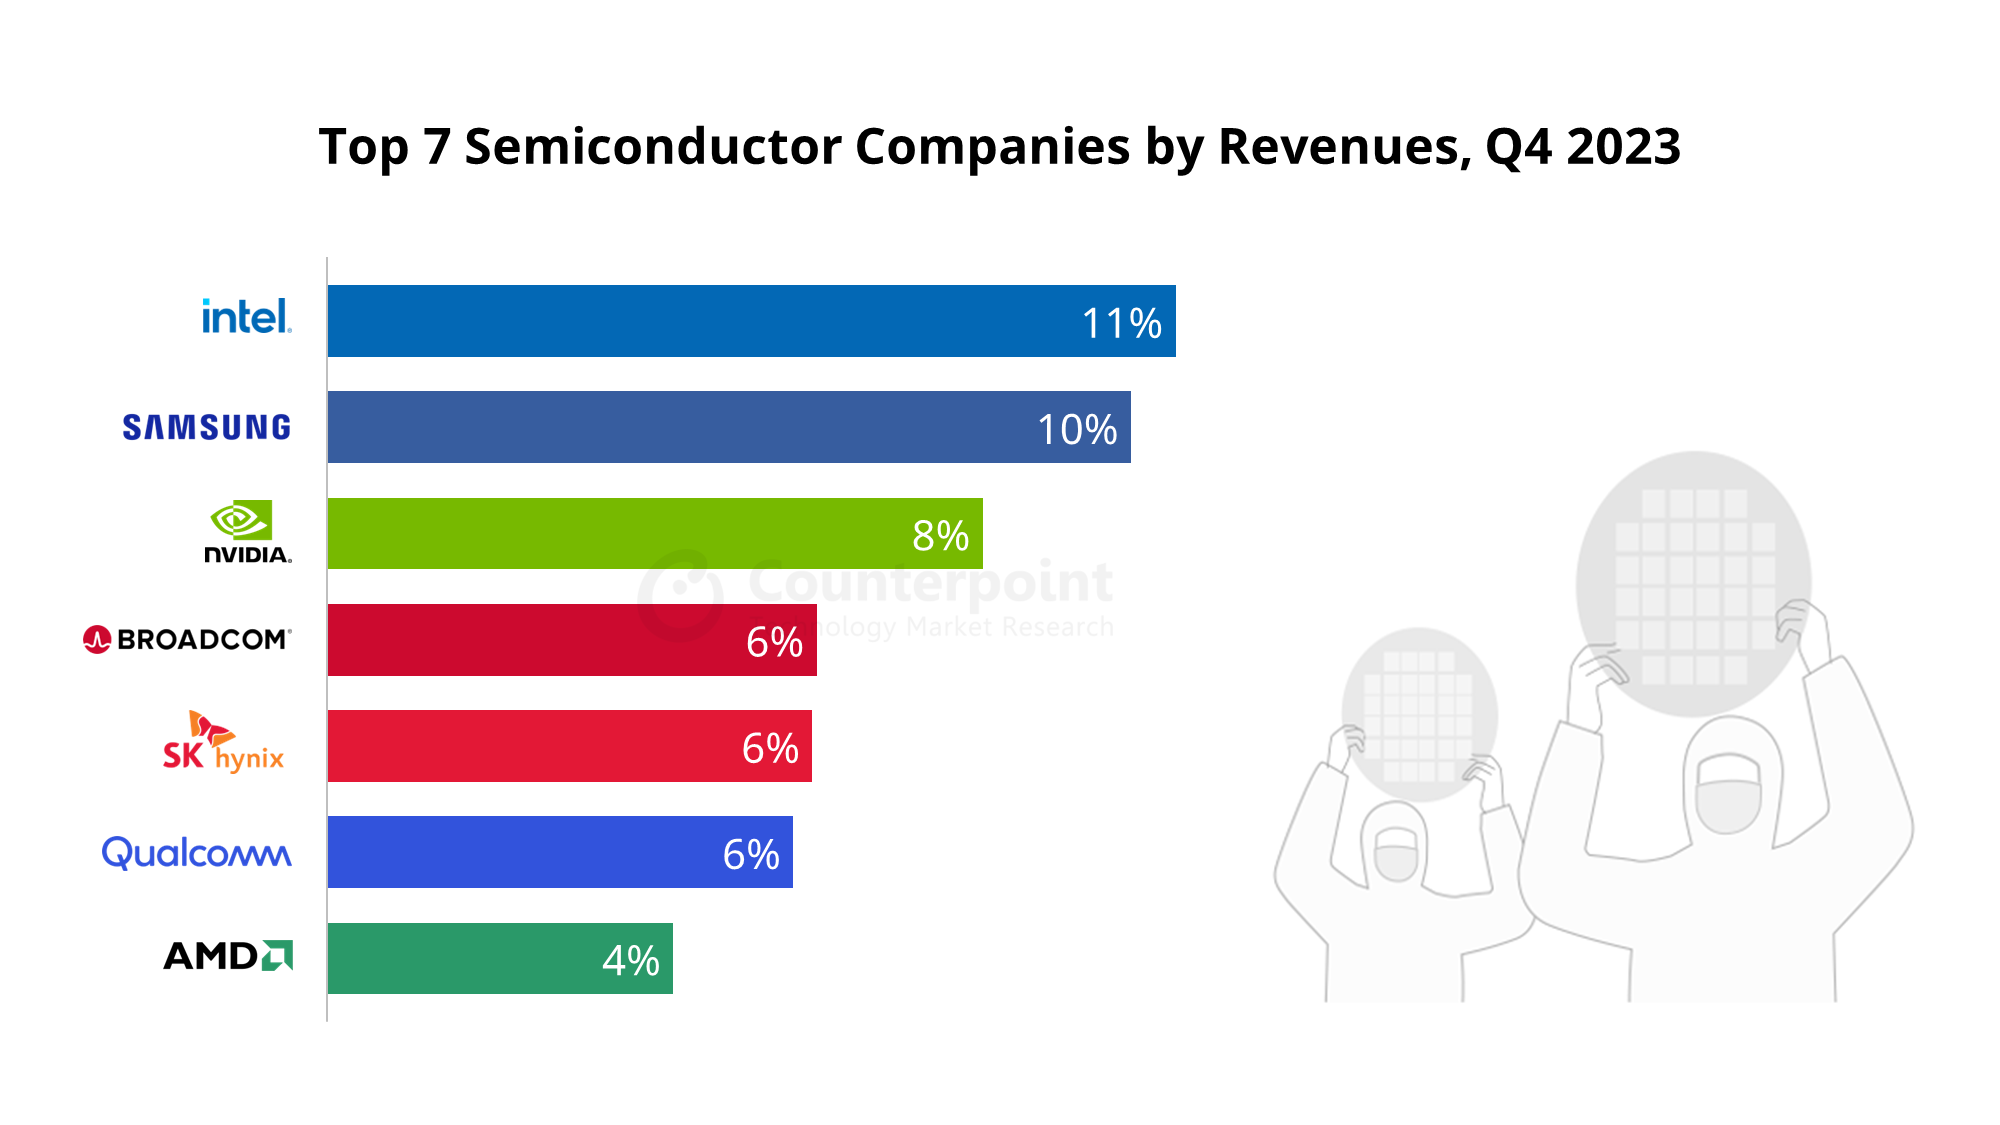 Top 7 Semiconductor Companies by Revenues, Q4 2023